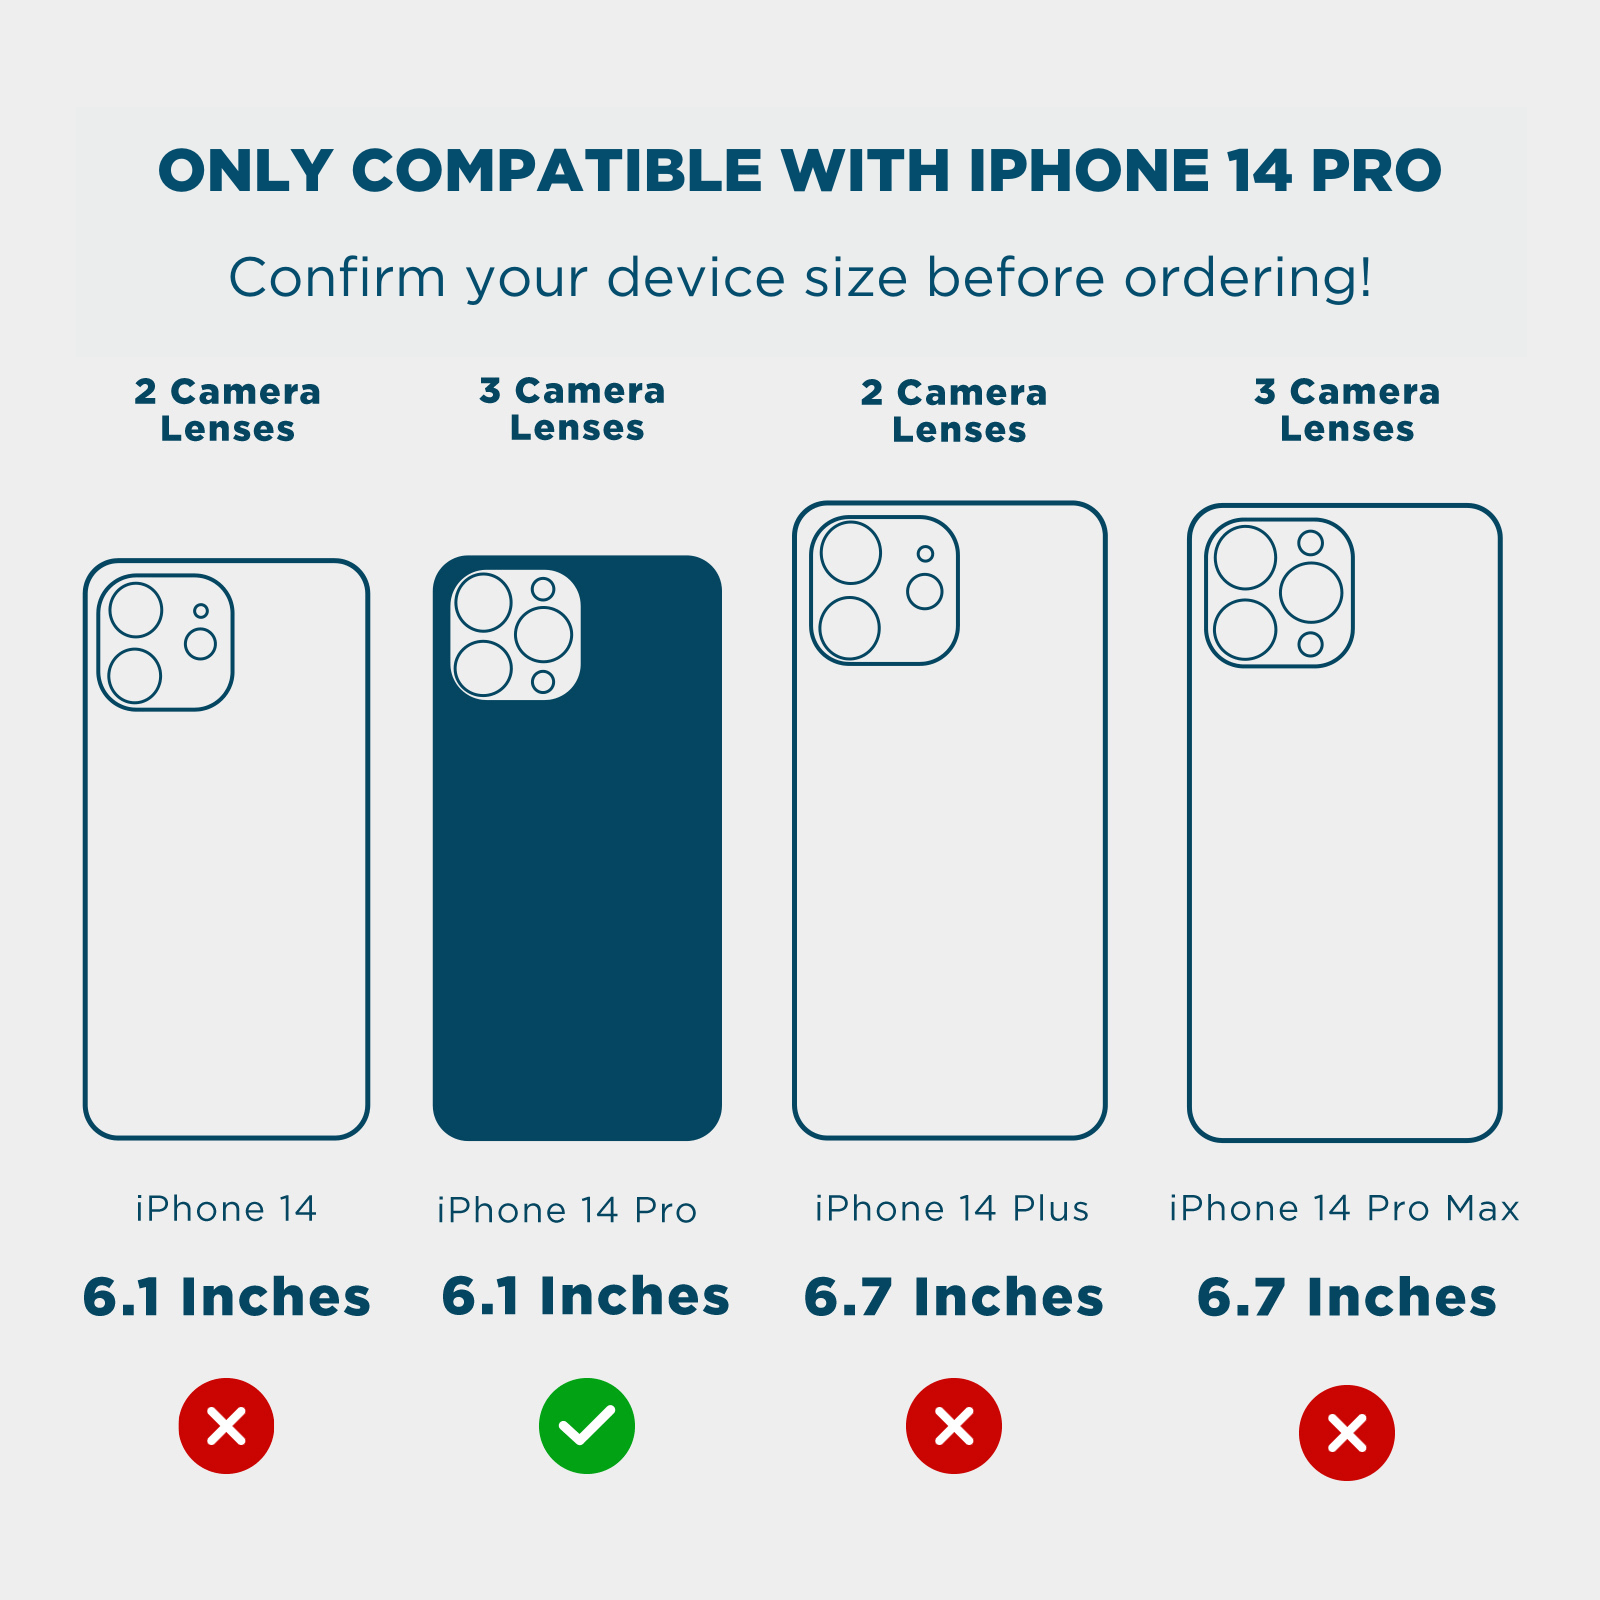 ONLY COMPATIBLE WITH IPHONE 14 PRO. CONFIRM YOUR DEVICE SIZE BEFORE ORDERING. 2 CAMERA LENSES, 3 CAMERA LENSES, 2 CAMERA LENSES, 3 CAMERA LENSES, 6.1, 6.1, 6.7, 6.7. COLOR::HOT PINK